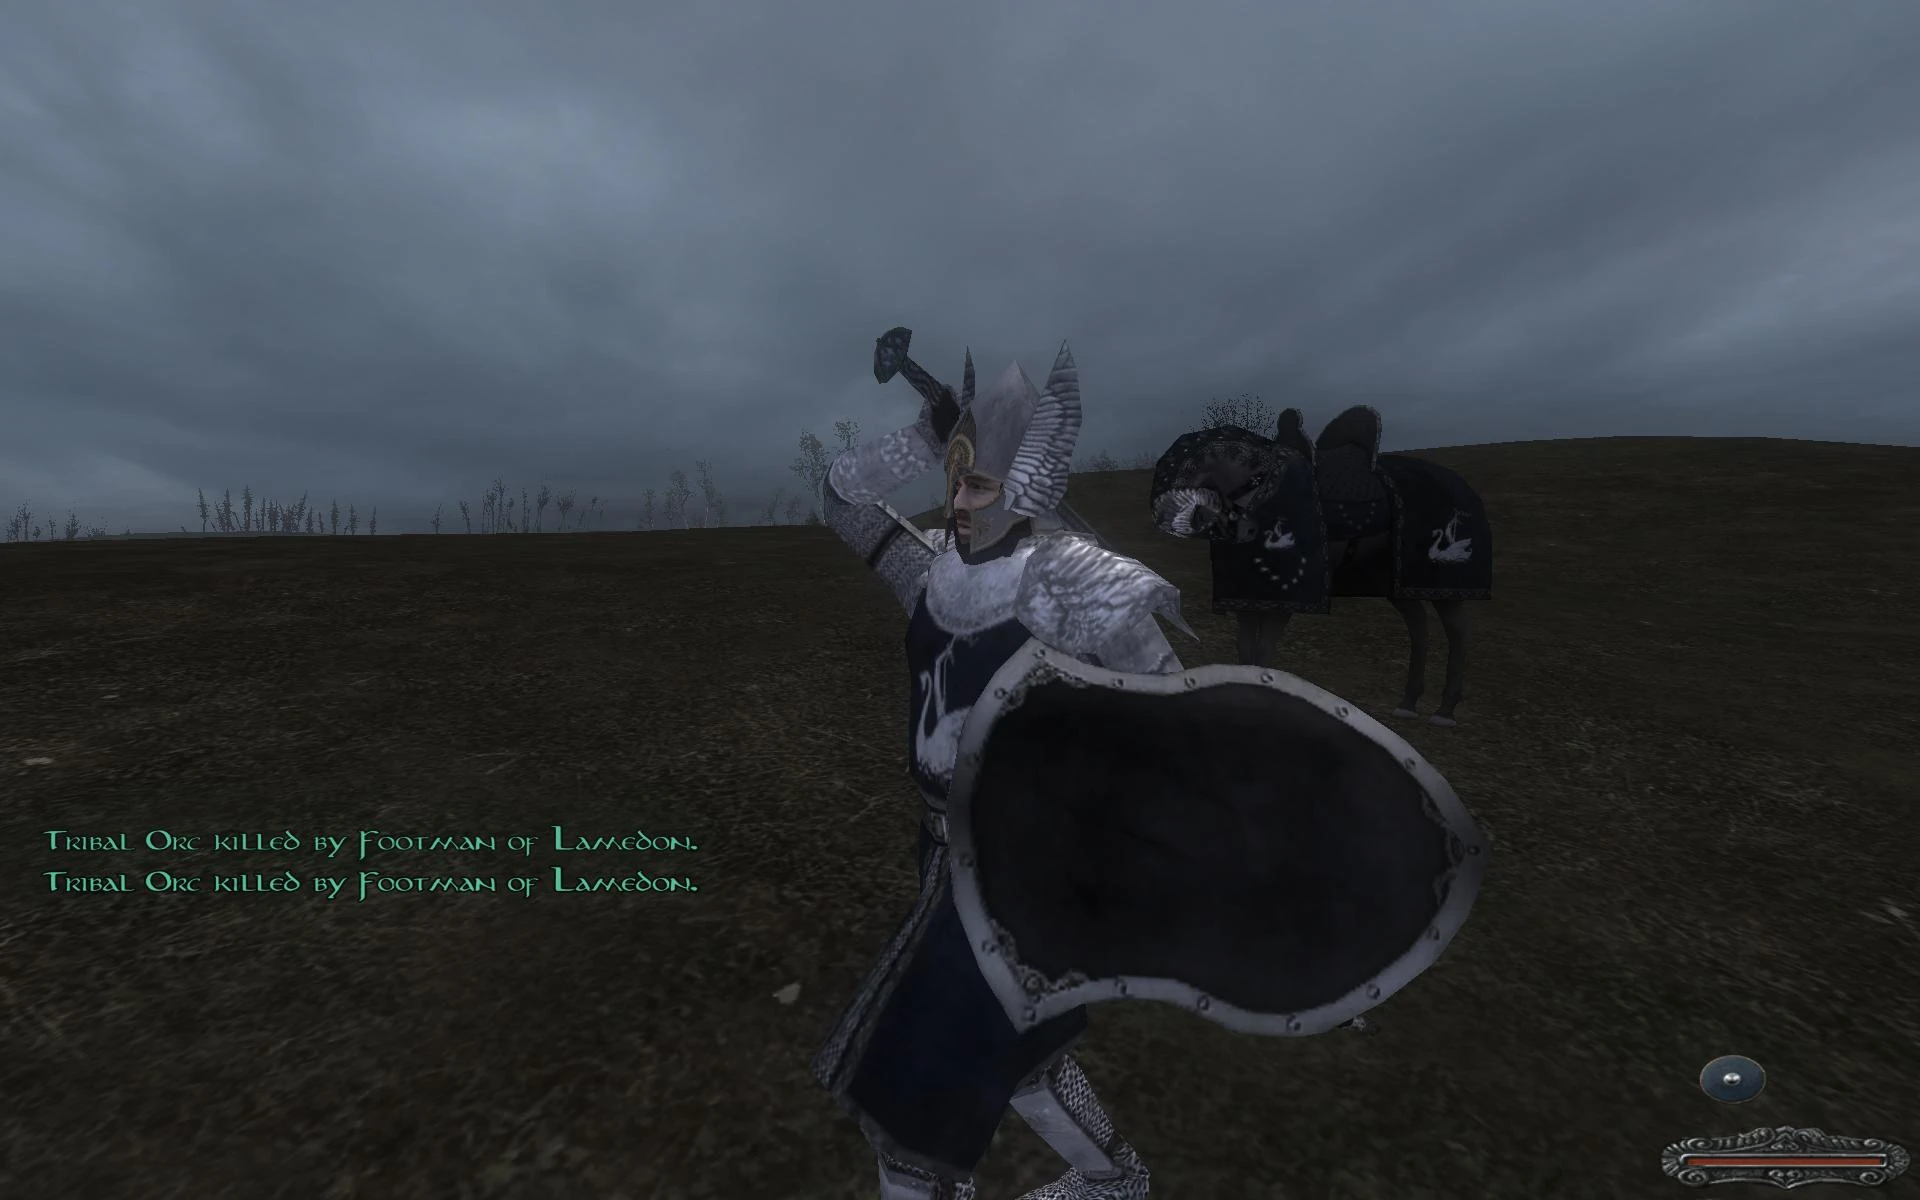 mount and blade lotr mod